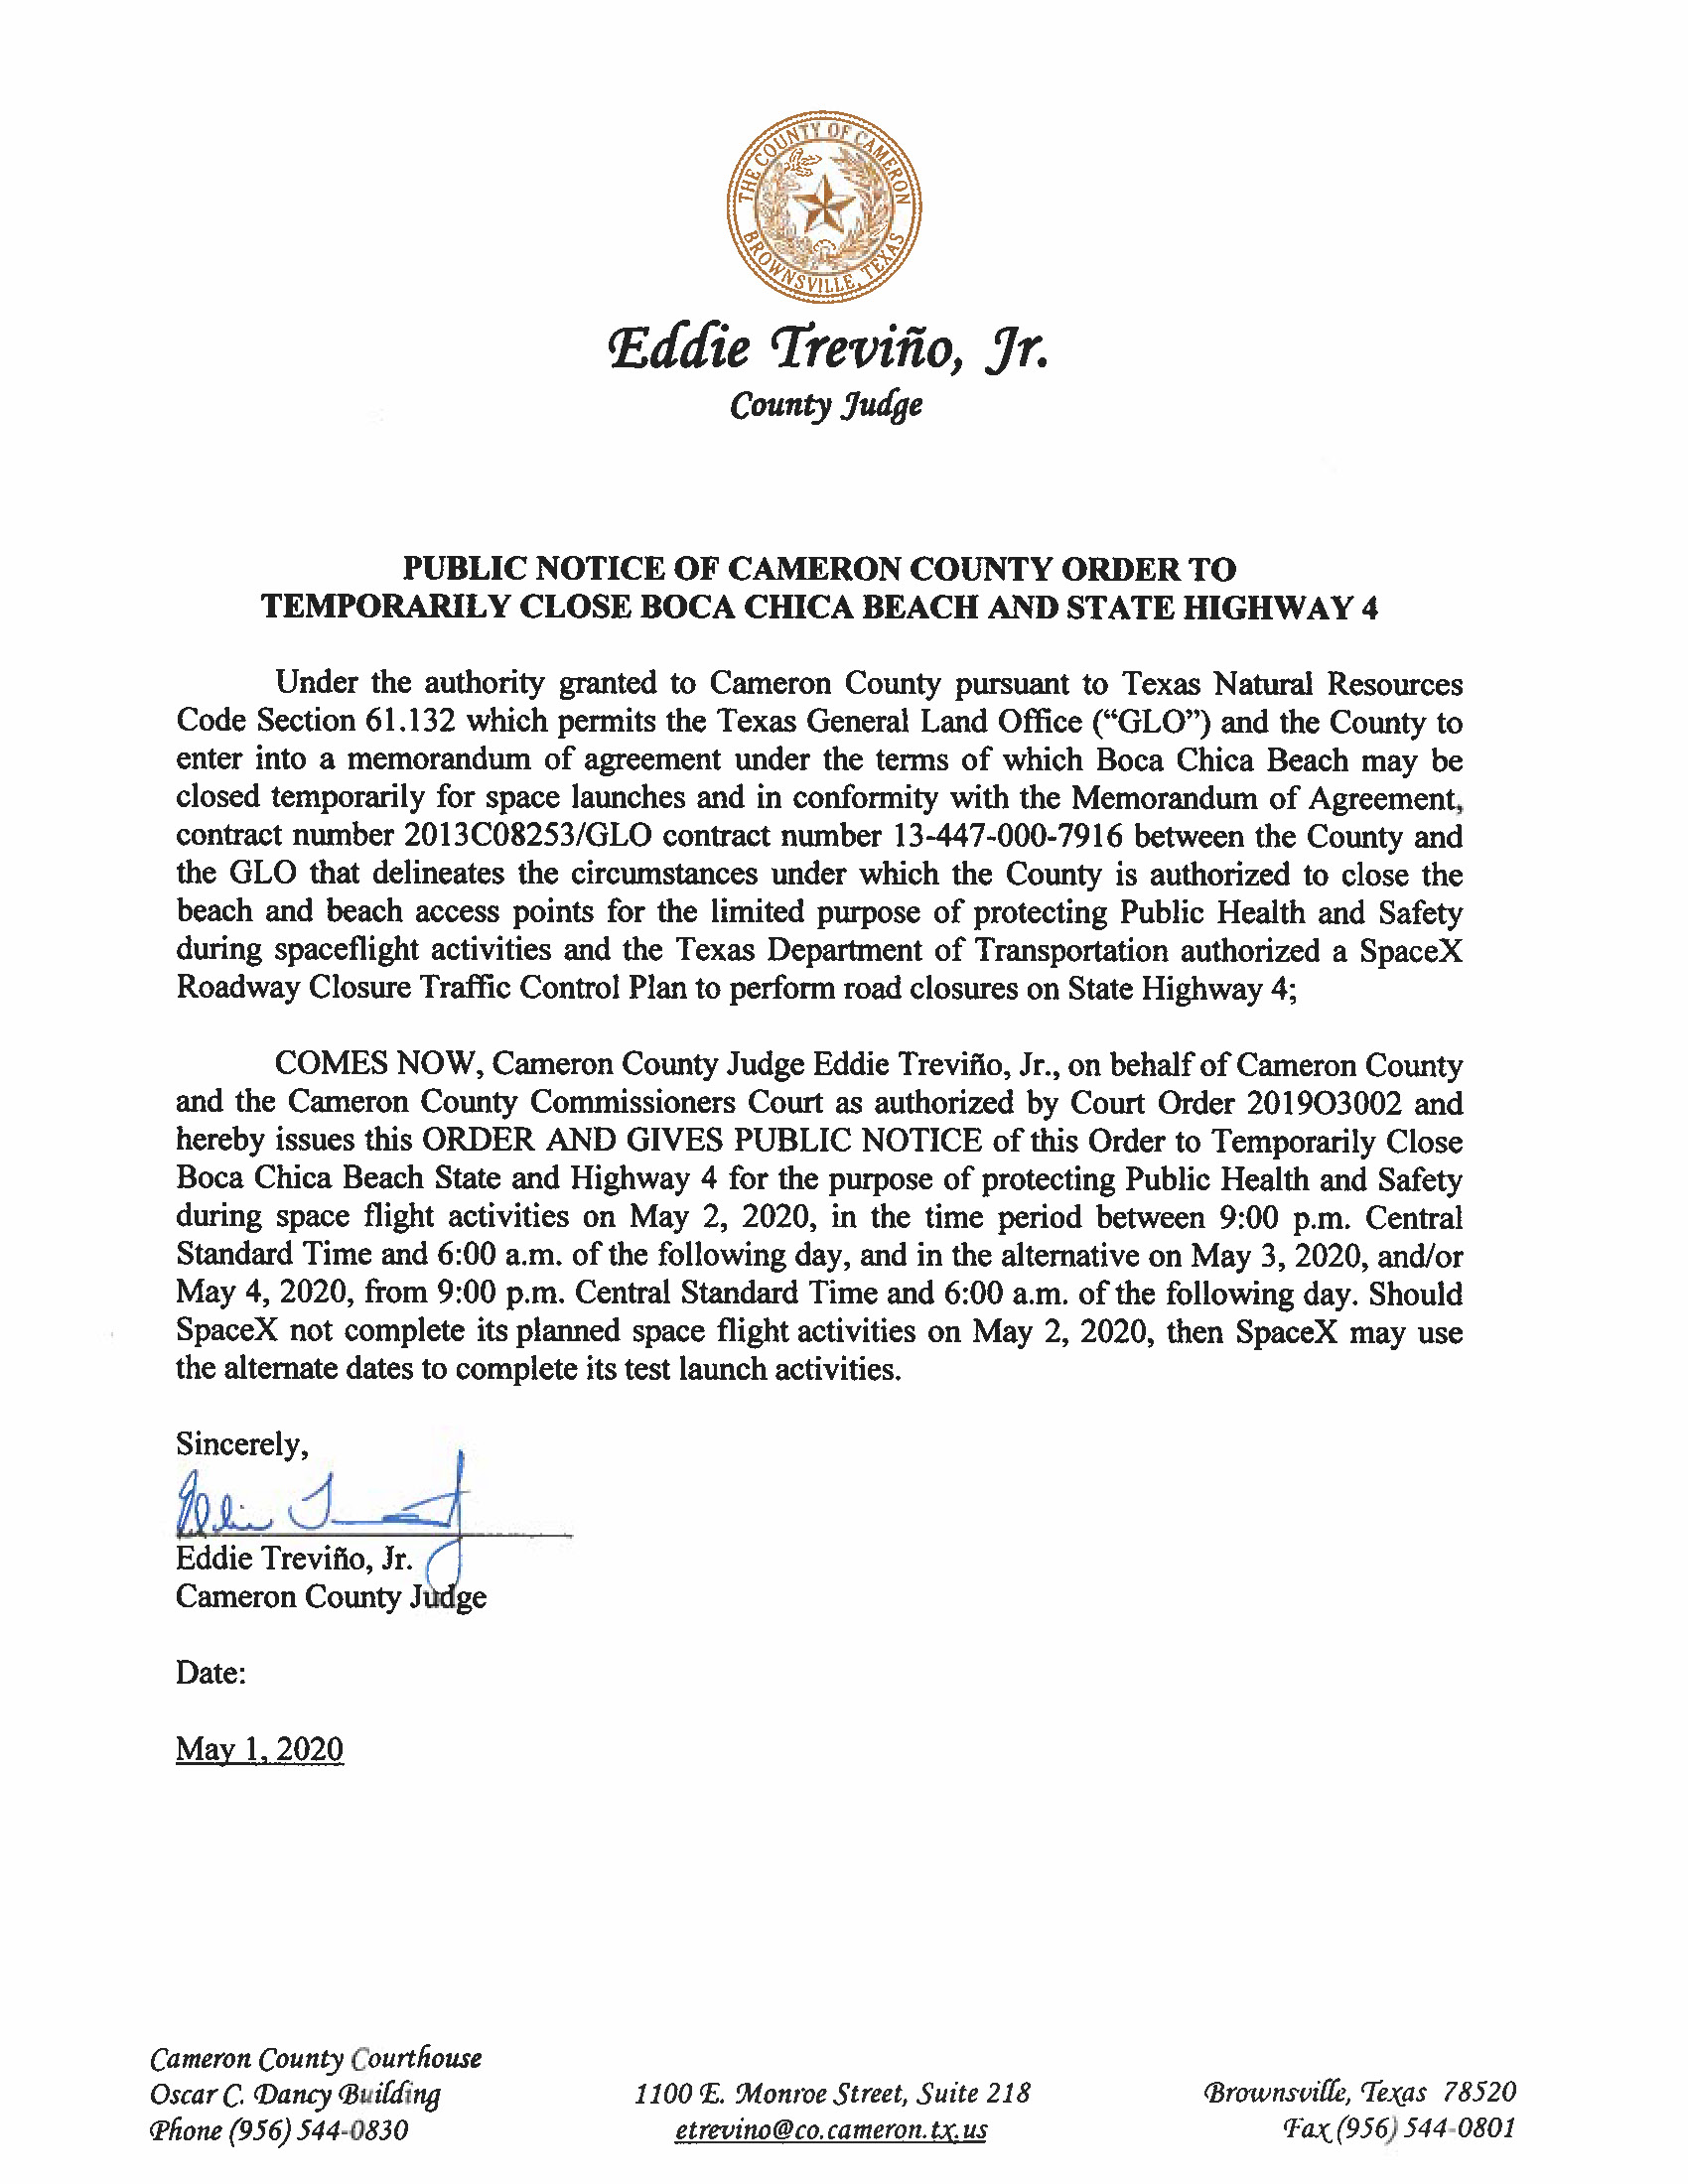 PUBLIC NOTICE OF CAMERON COUNTY ORDER TO TEMP. BEACH CLOSURE AND HWY. 05.02.20 Page 1